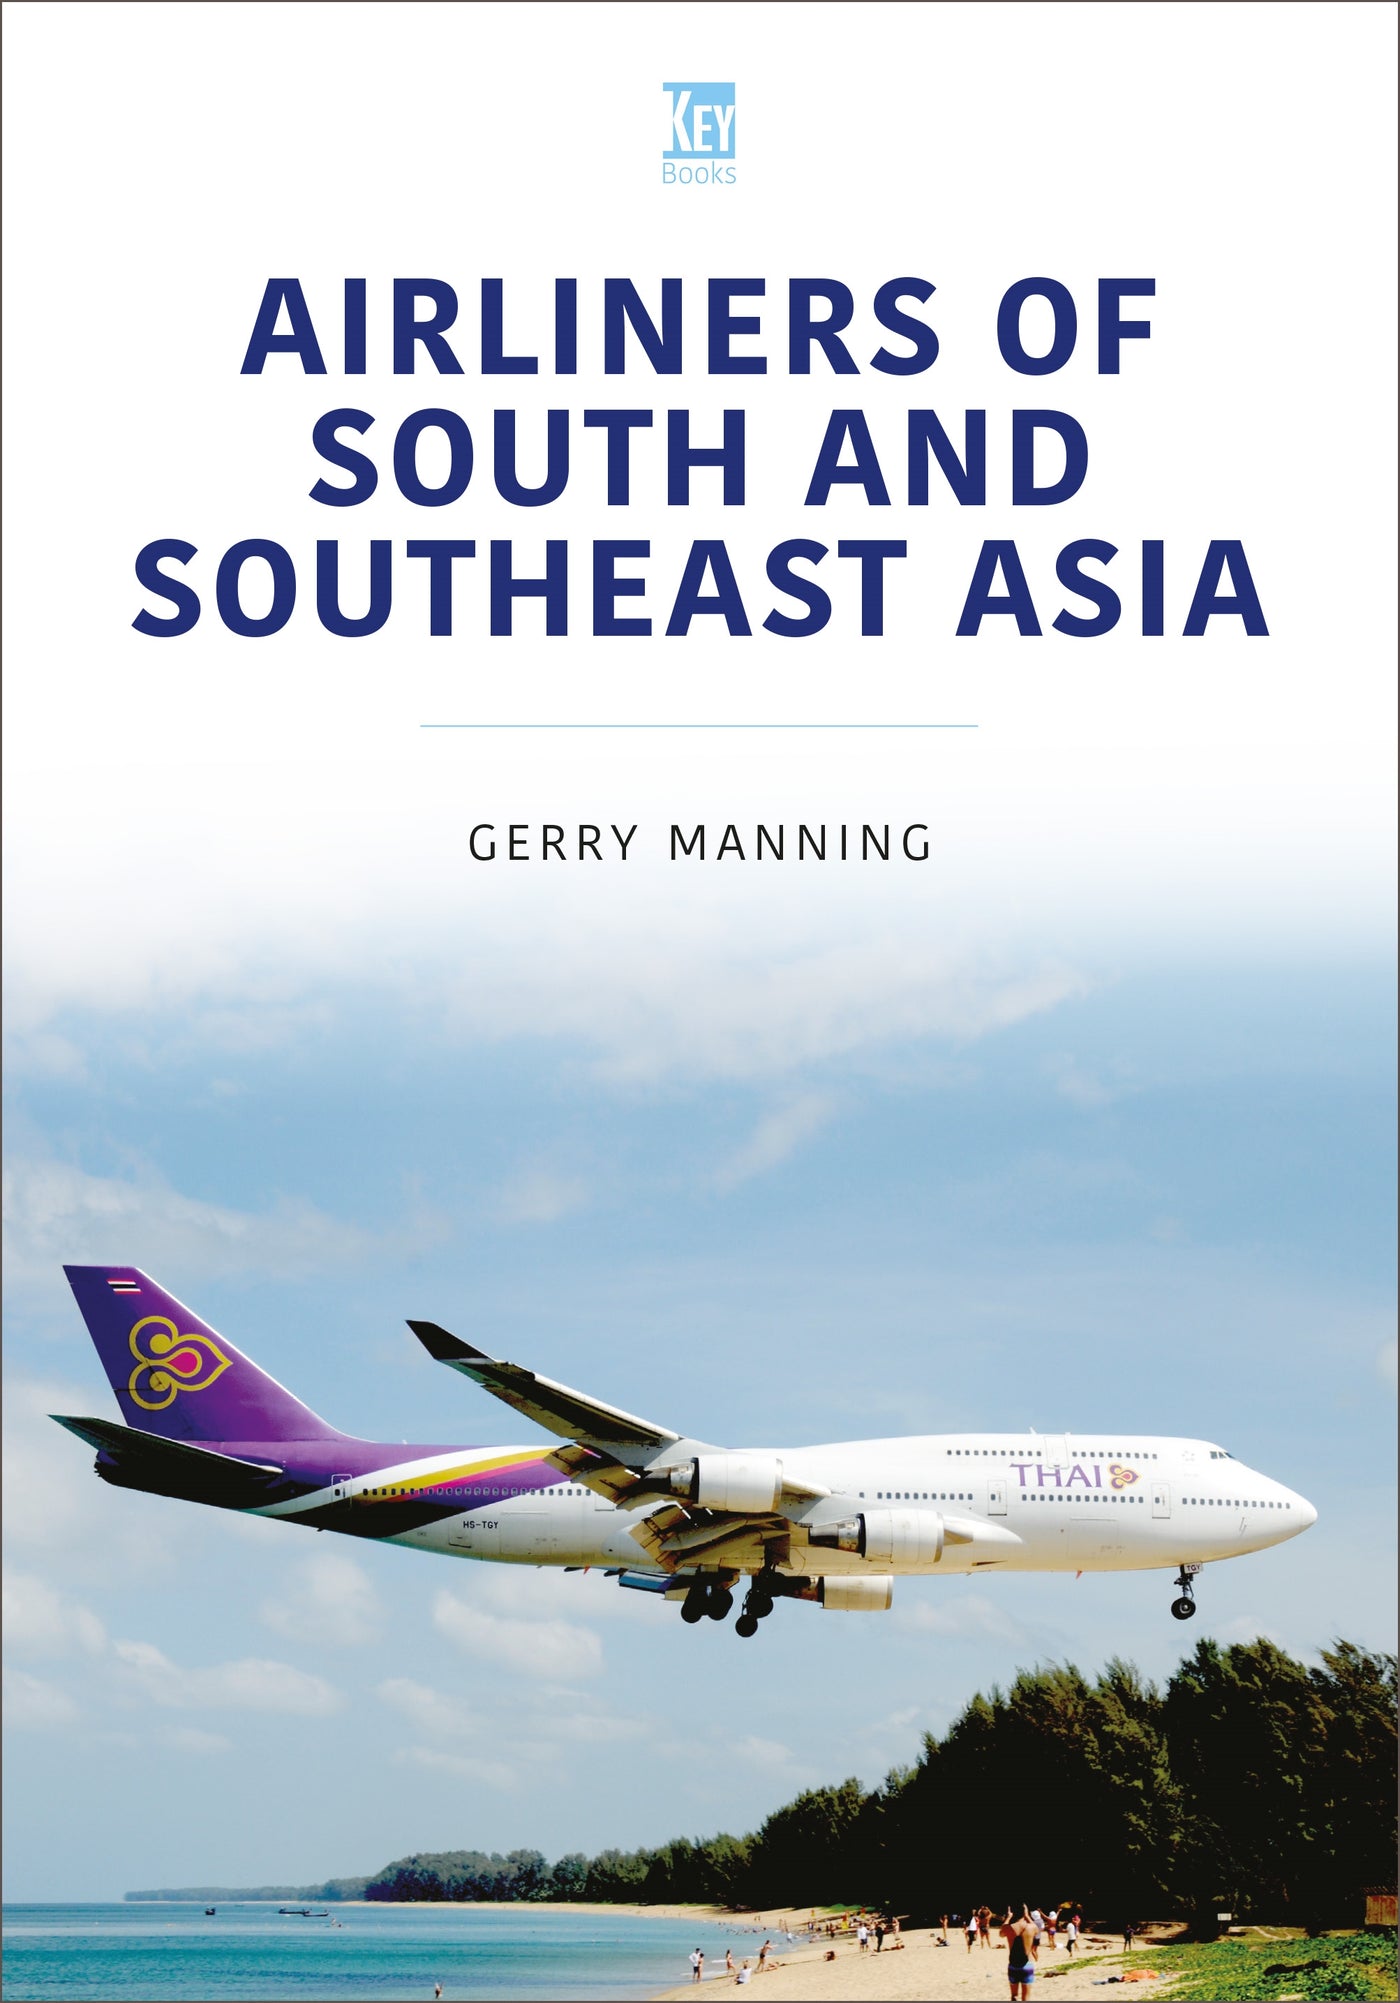 Airliners of South and Southeast Asia